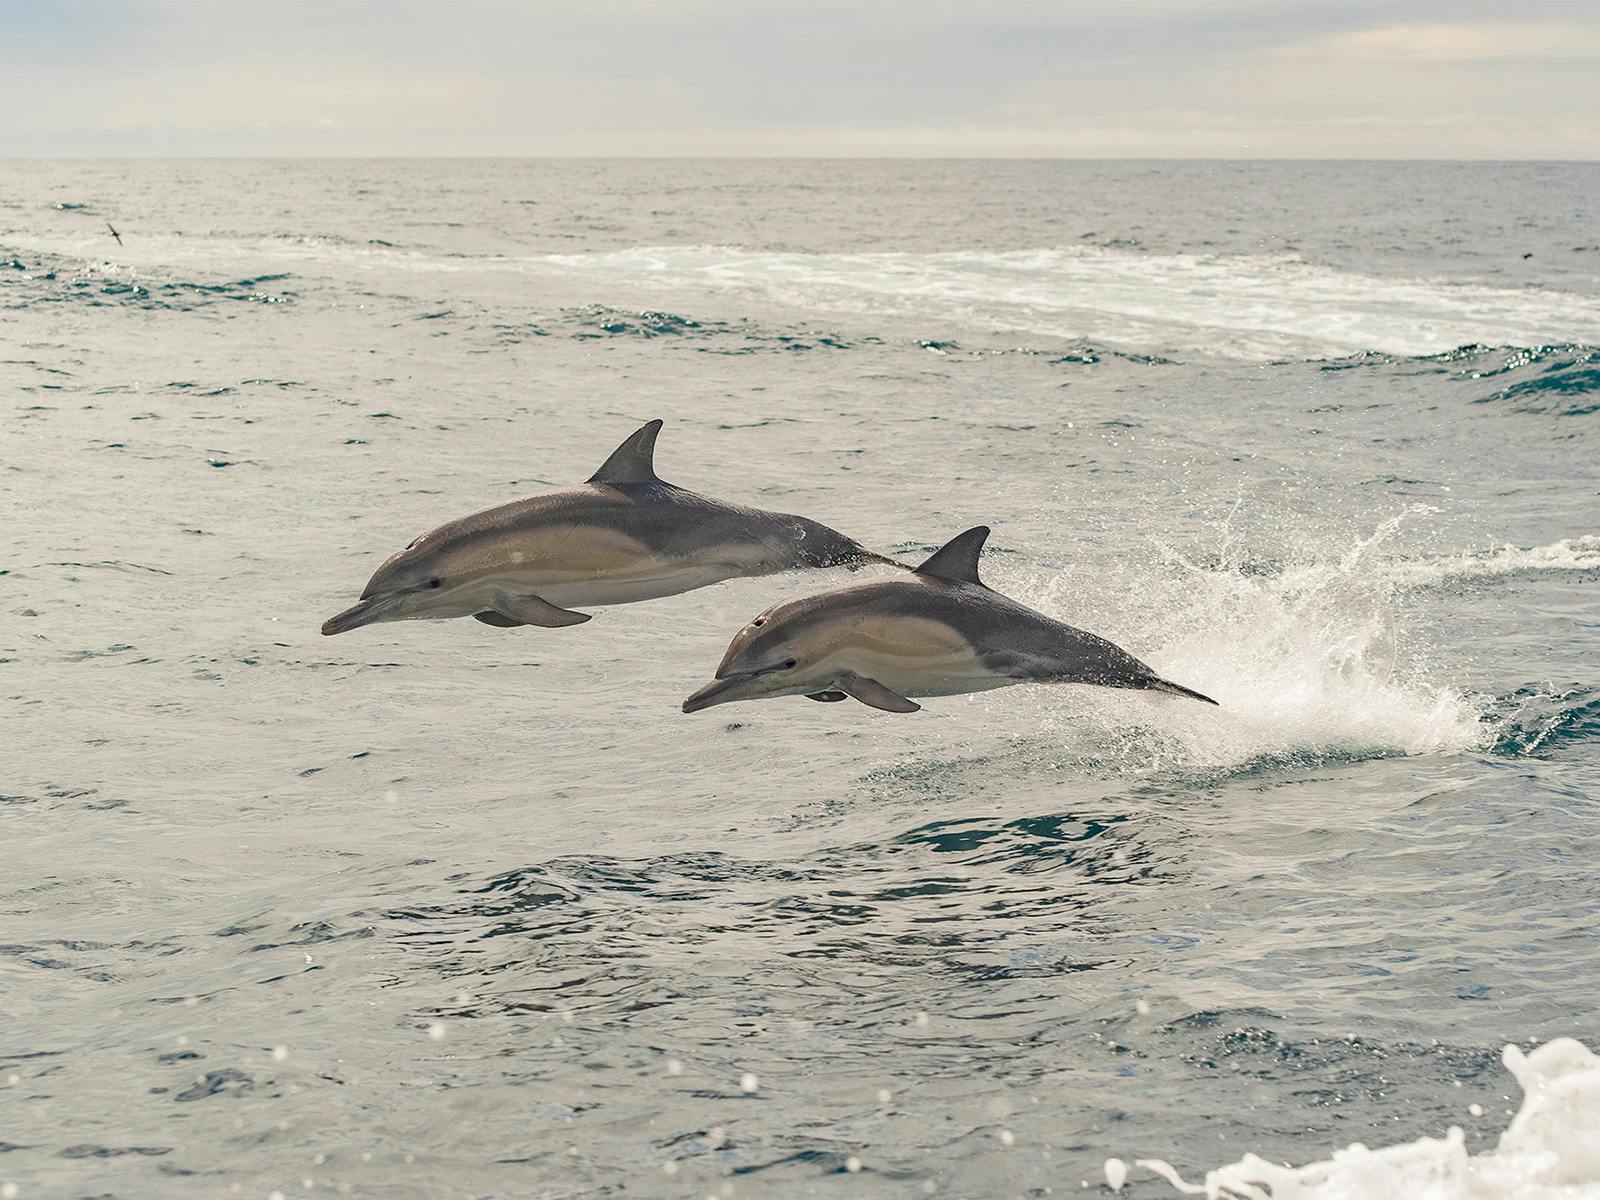 Dolphins at play, captured during the Bay of Fires Photography Workshop